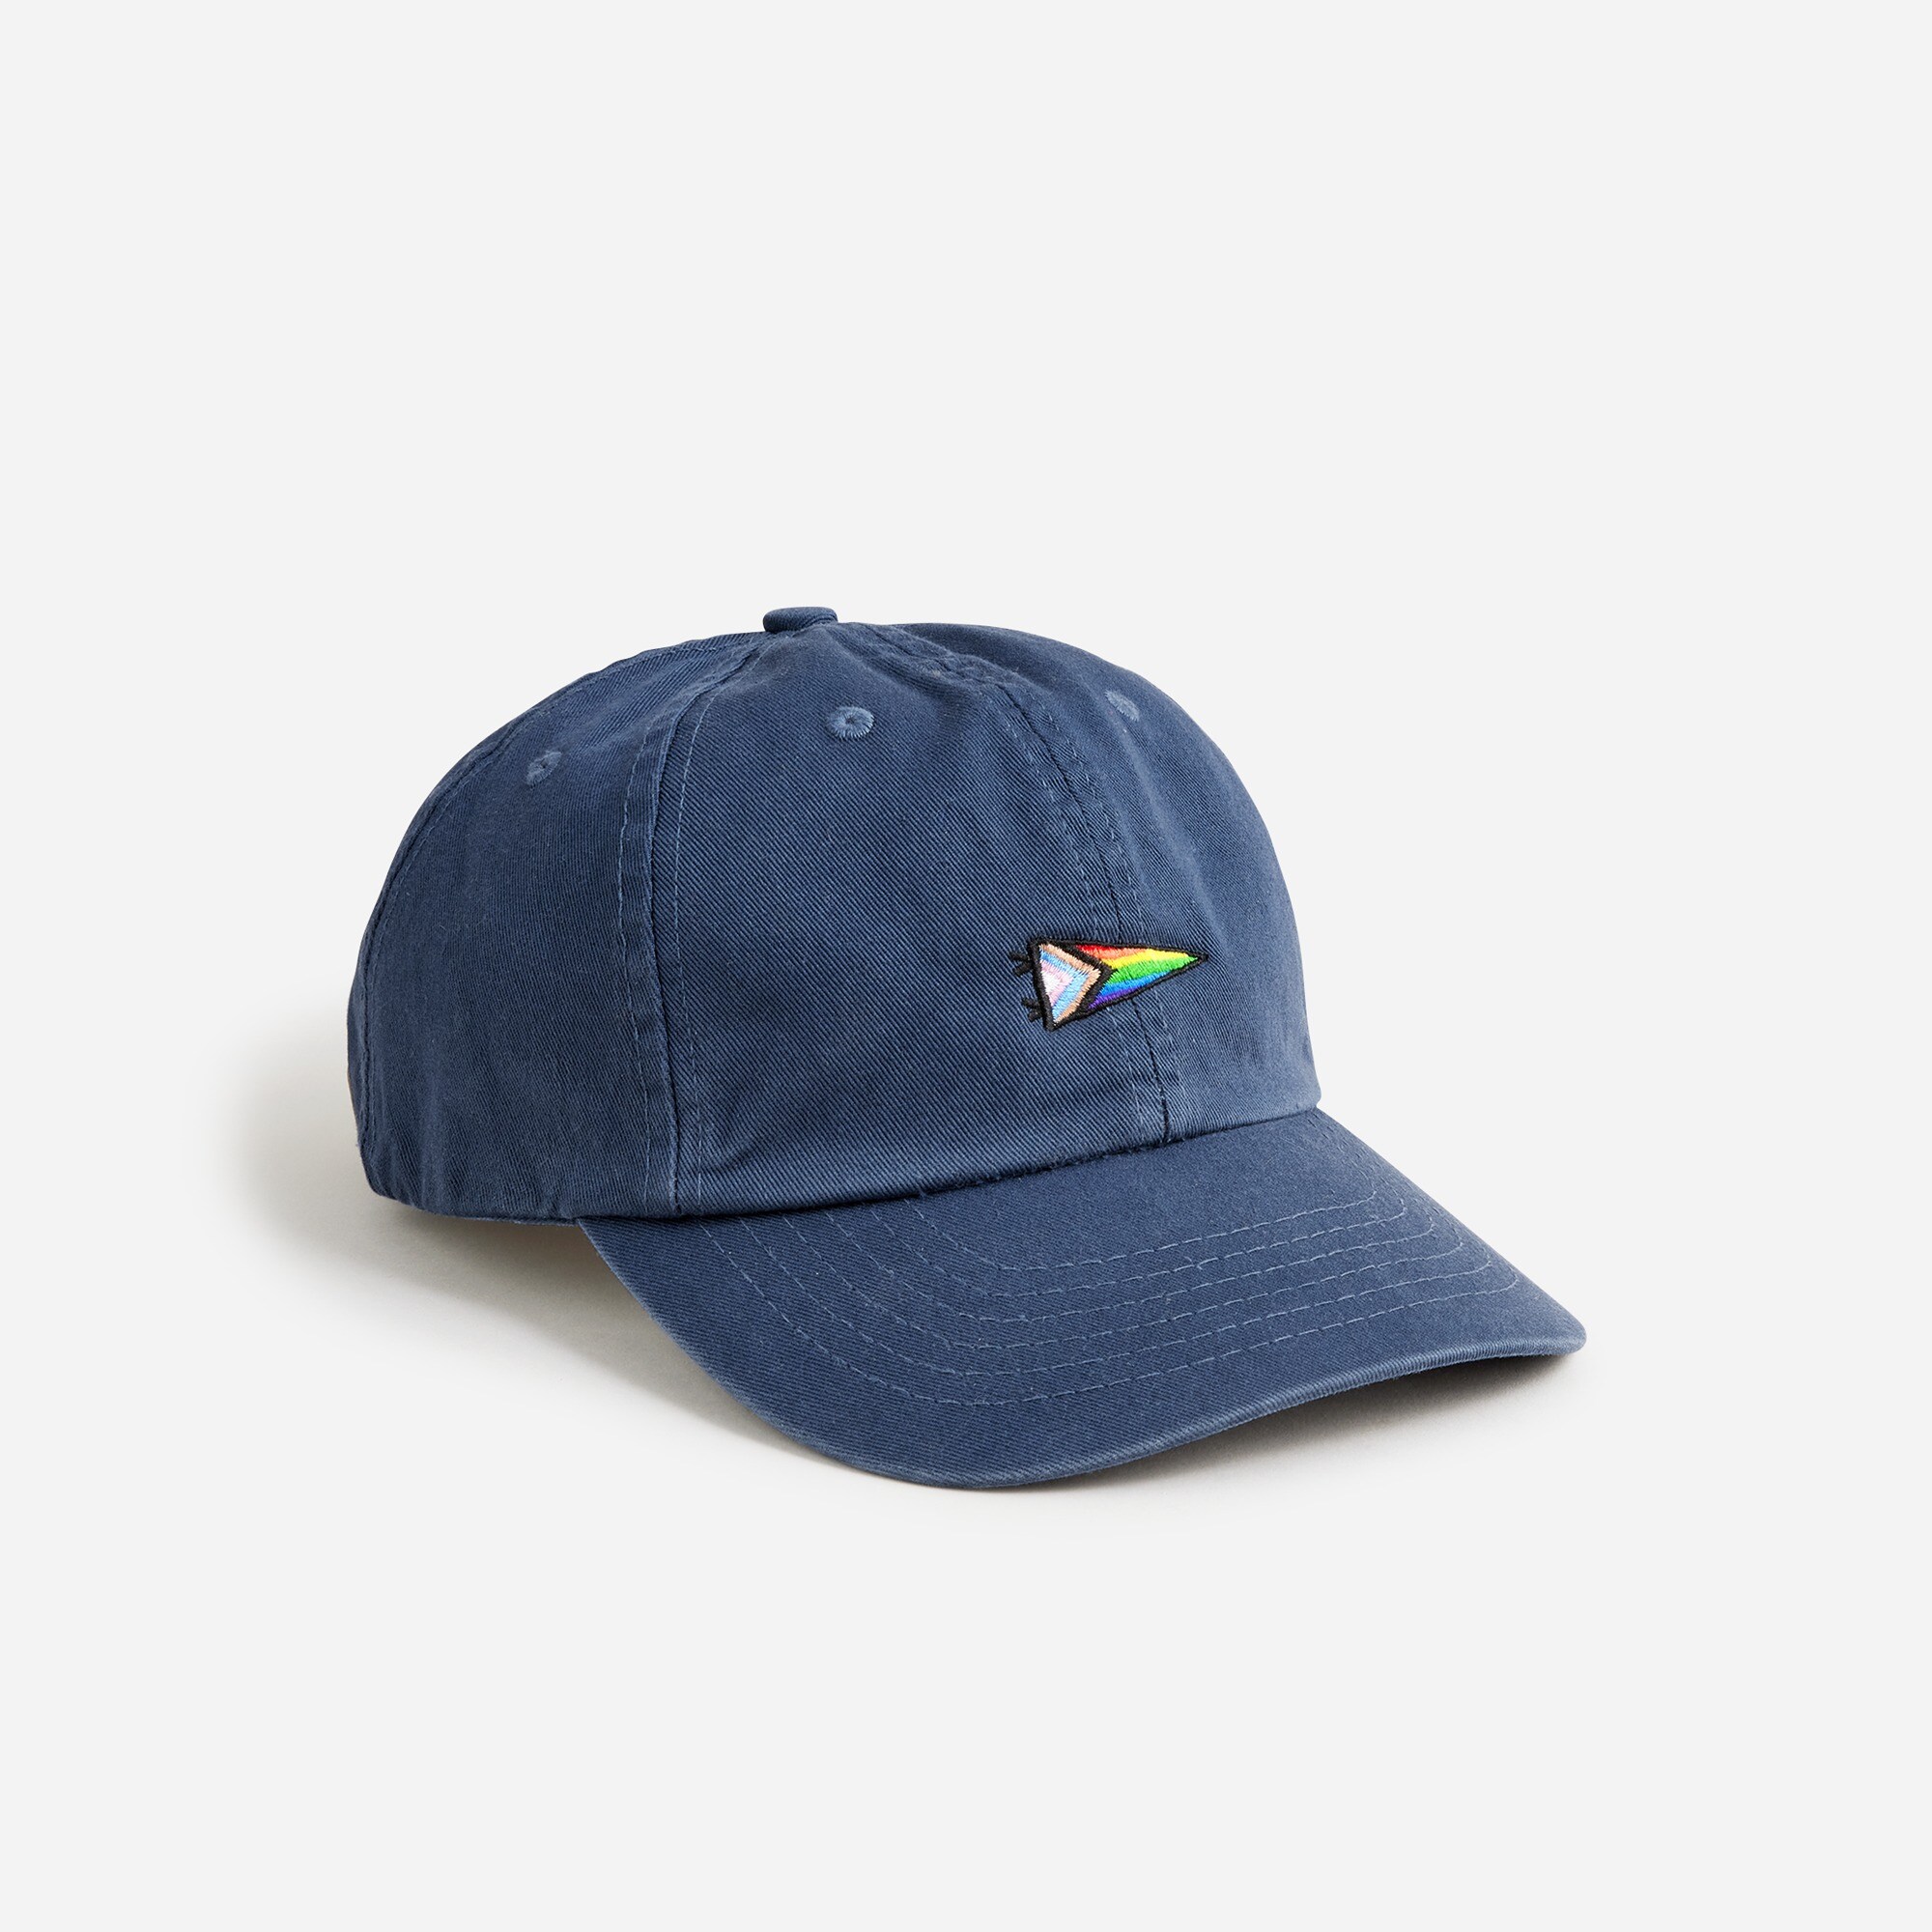 womens Made-in-the-USA garment-dyed twill Pride baseball cap